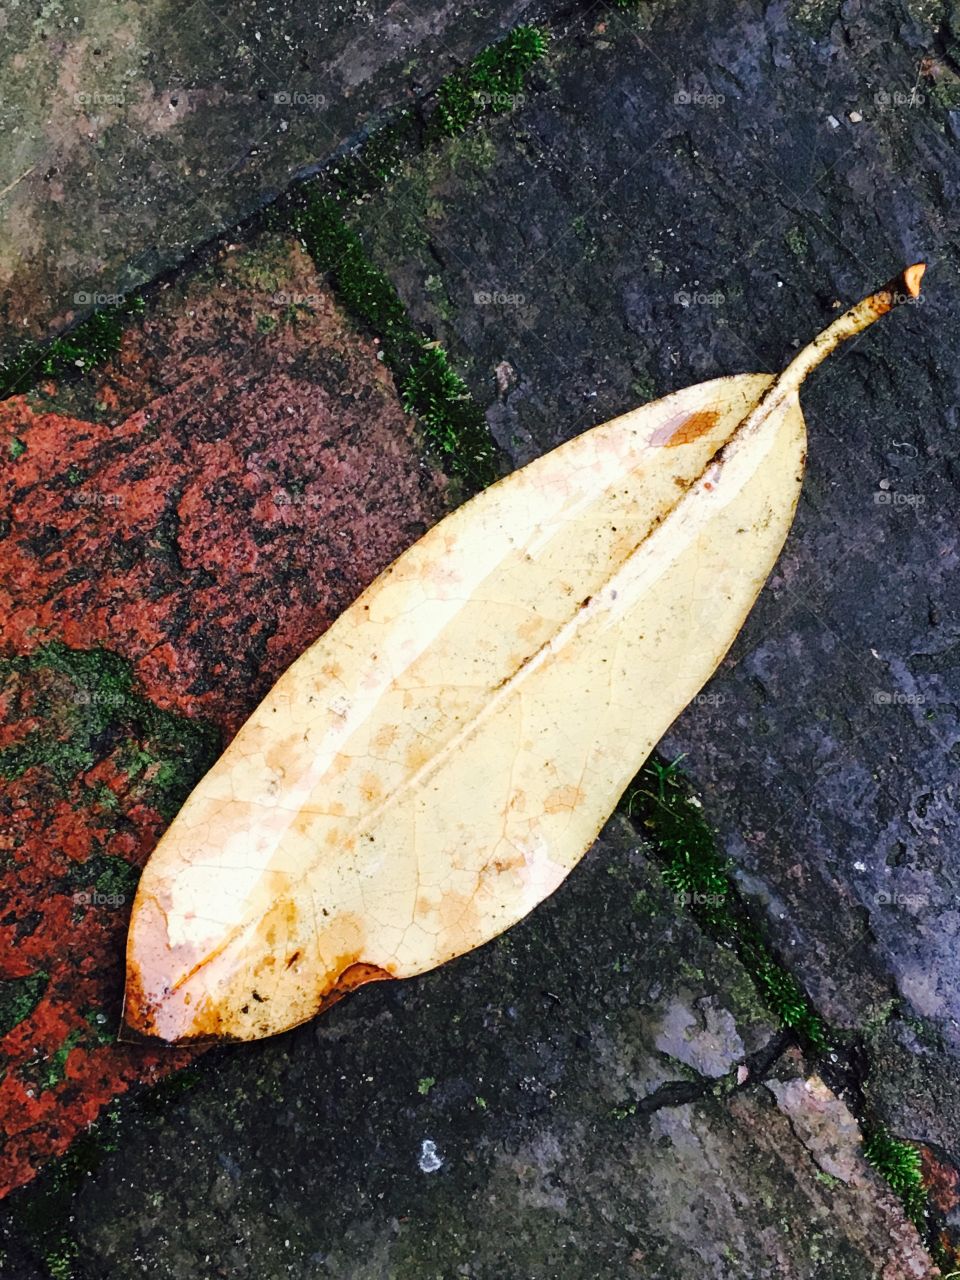 Fallen Leave on the Wet Ground